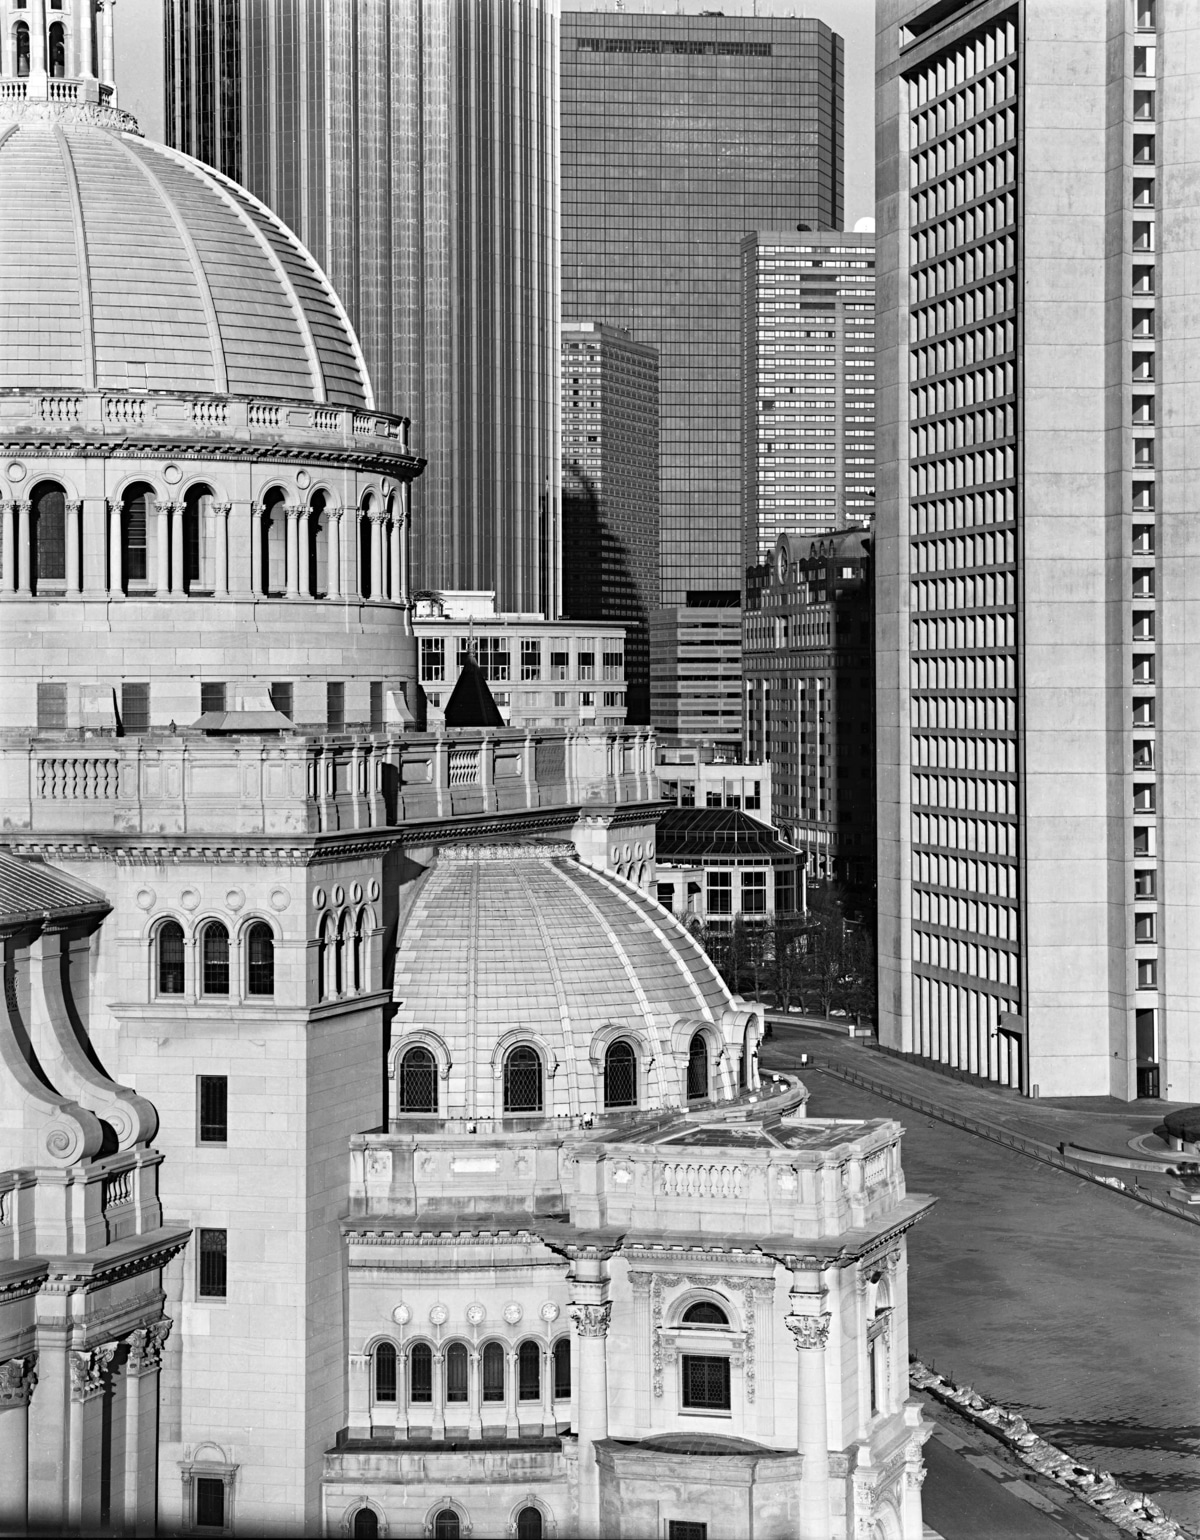 View of Christian Science Center, Boston